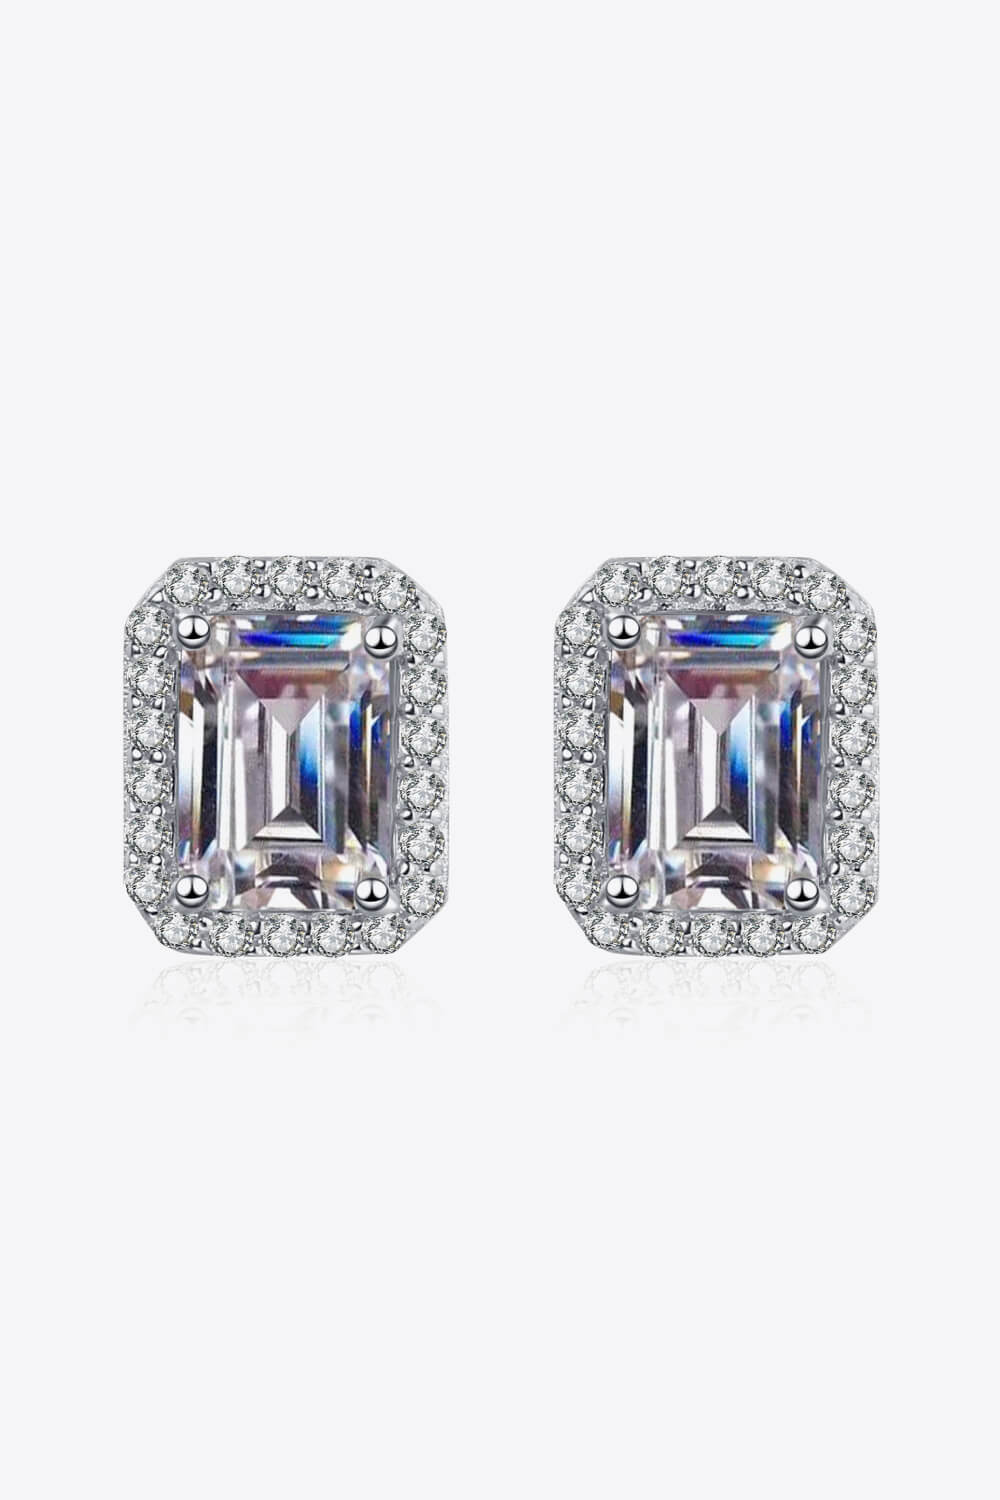 Adored 1 Carat Moissanite Rhodium-Plated Square Stud Earrings